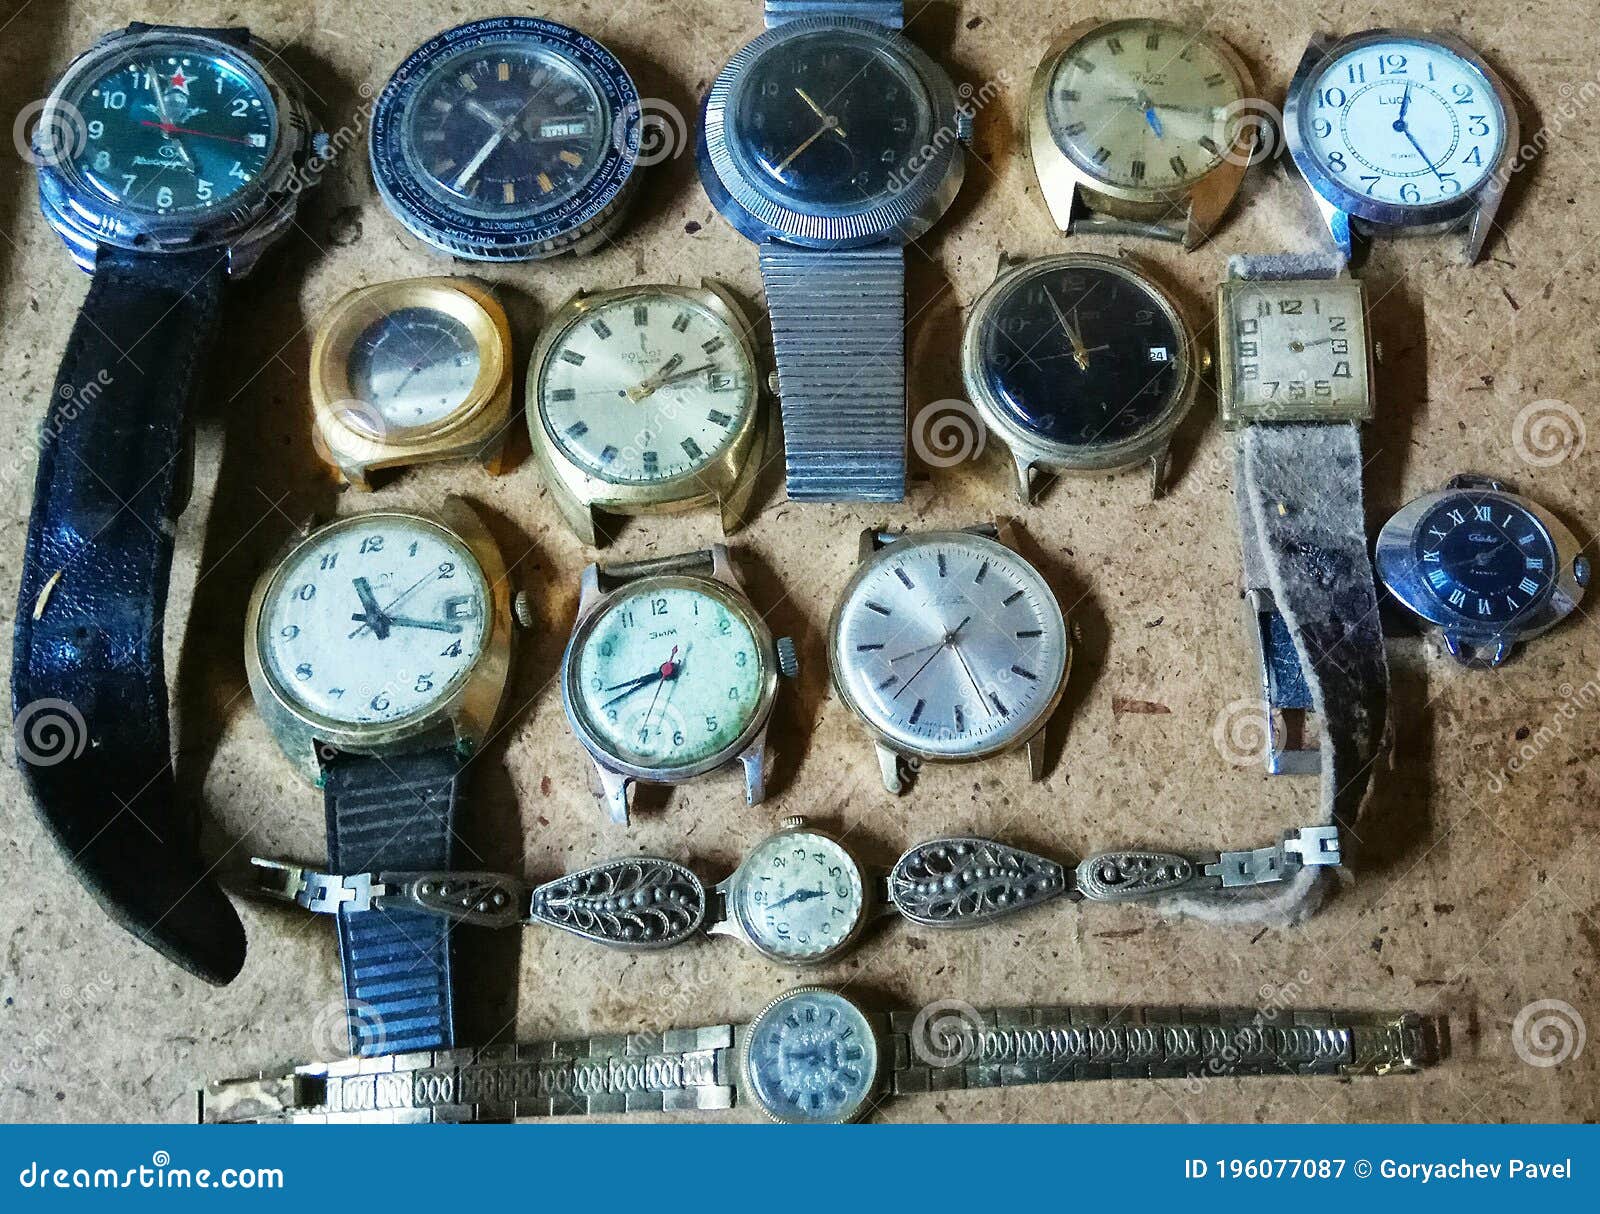 A Lot of Old Battered Broken Soviet Antique Watches Lie on the Wooden ...